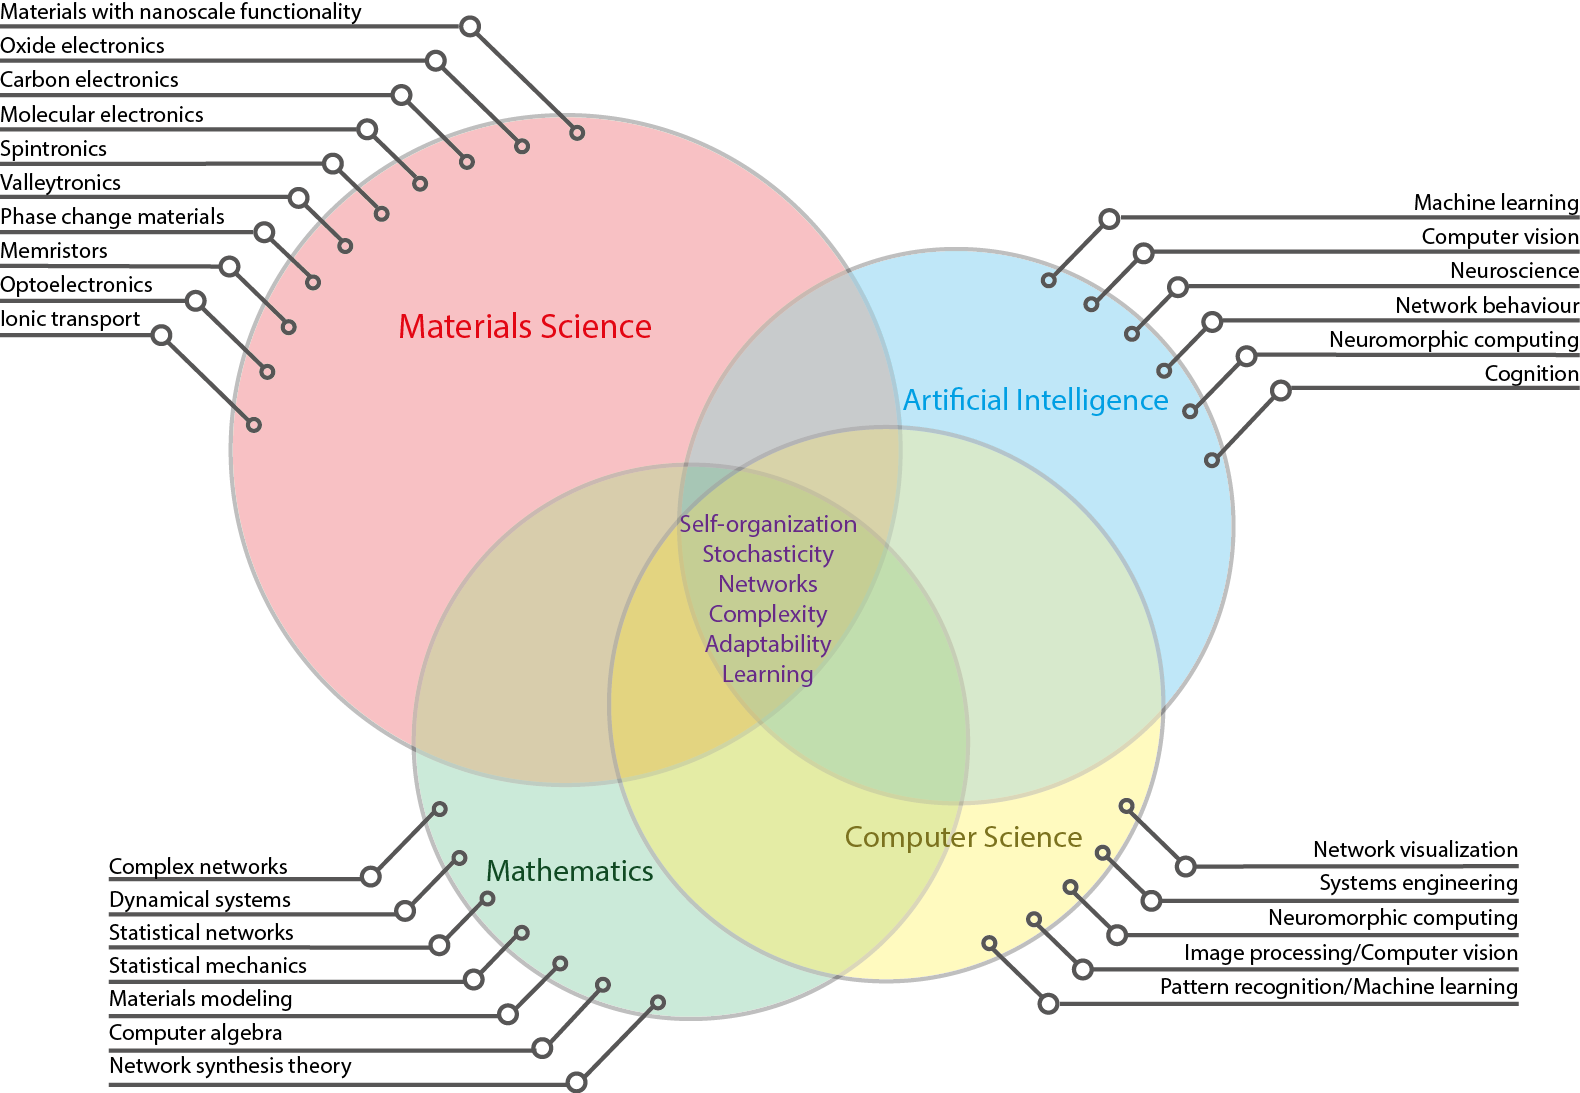 Overview of Current Expertise in Groningen Cognitive Systems and Materials